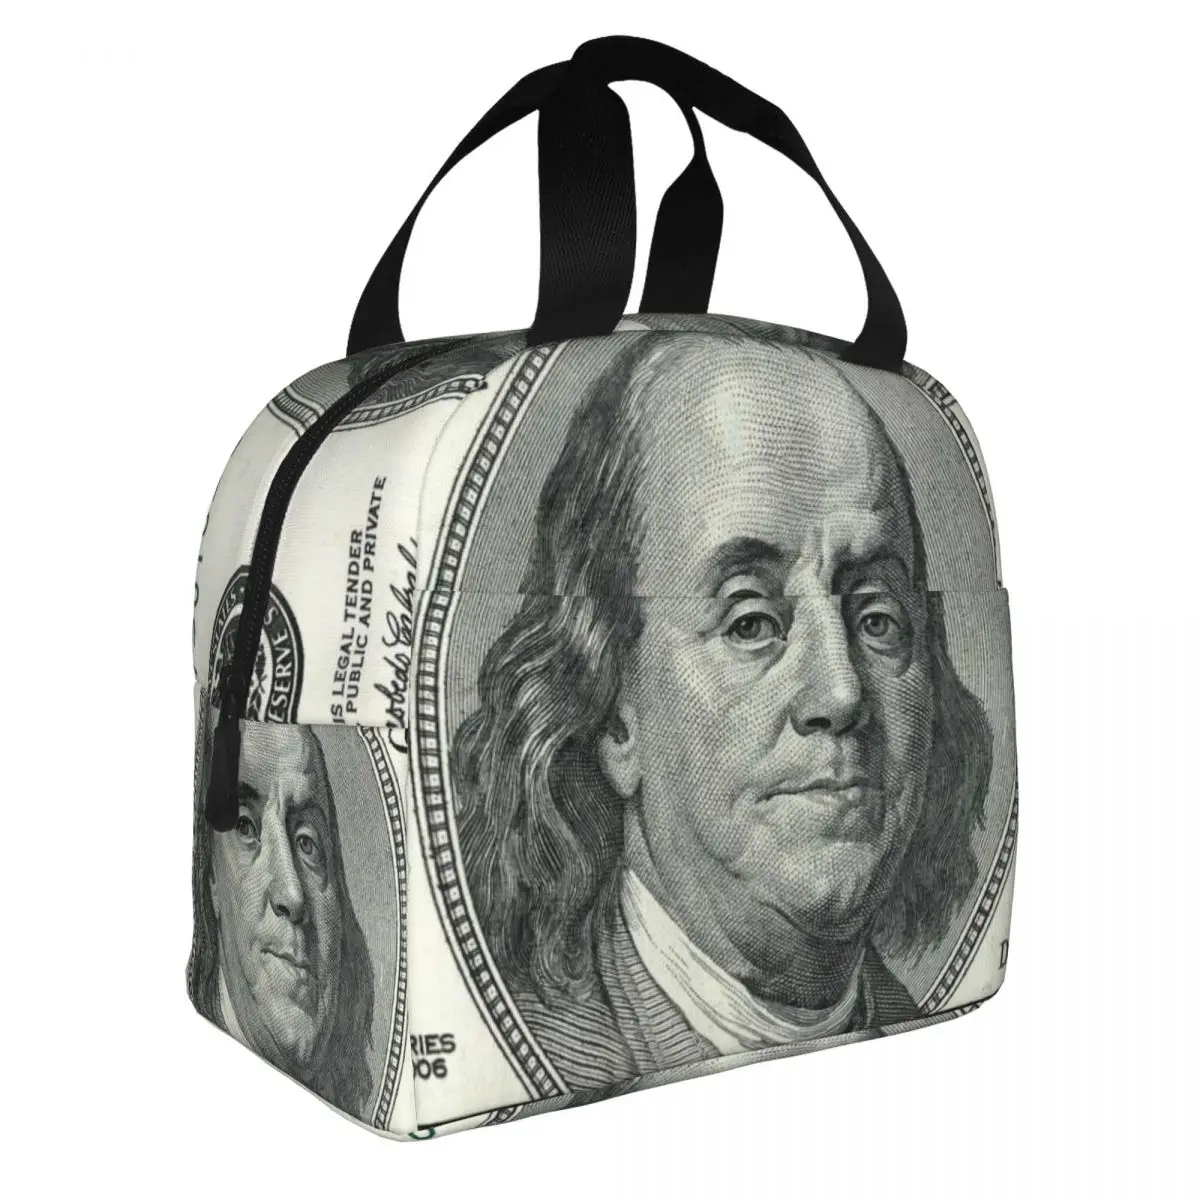 Dollar Money Lunch Bento Bags Portable Aluminum Foil thickened Thermal Cloth Lunch Bag for Women Men Boy